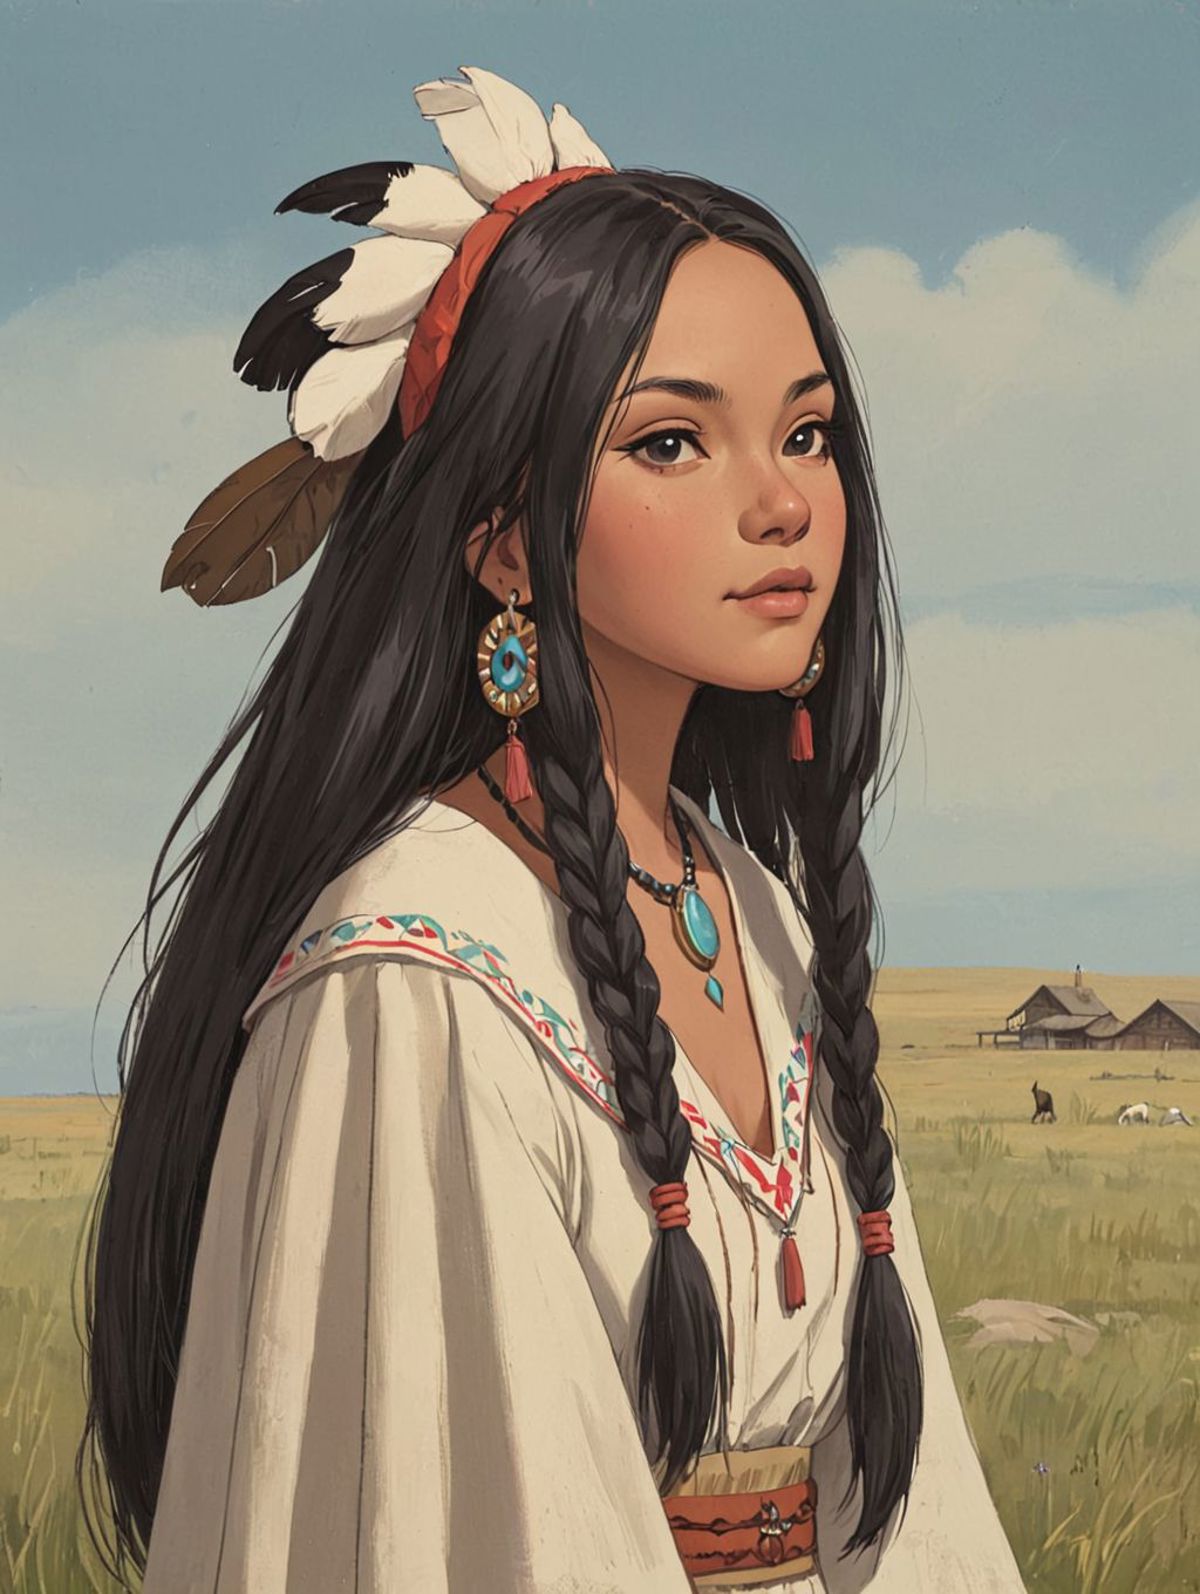 Drawing of a Native American woman with long black hair and a white headband.